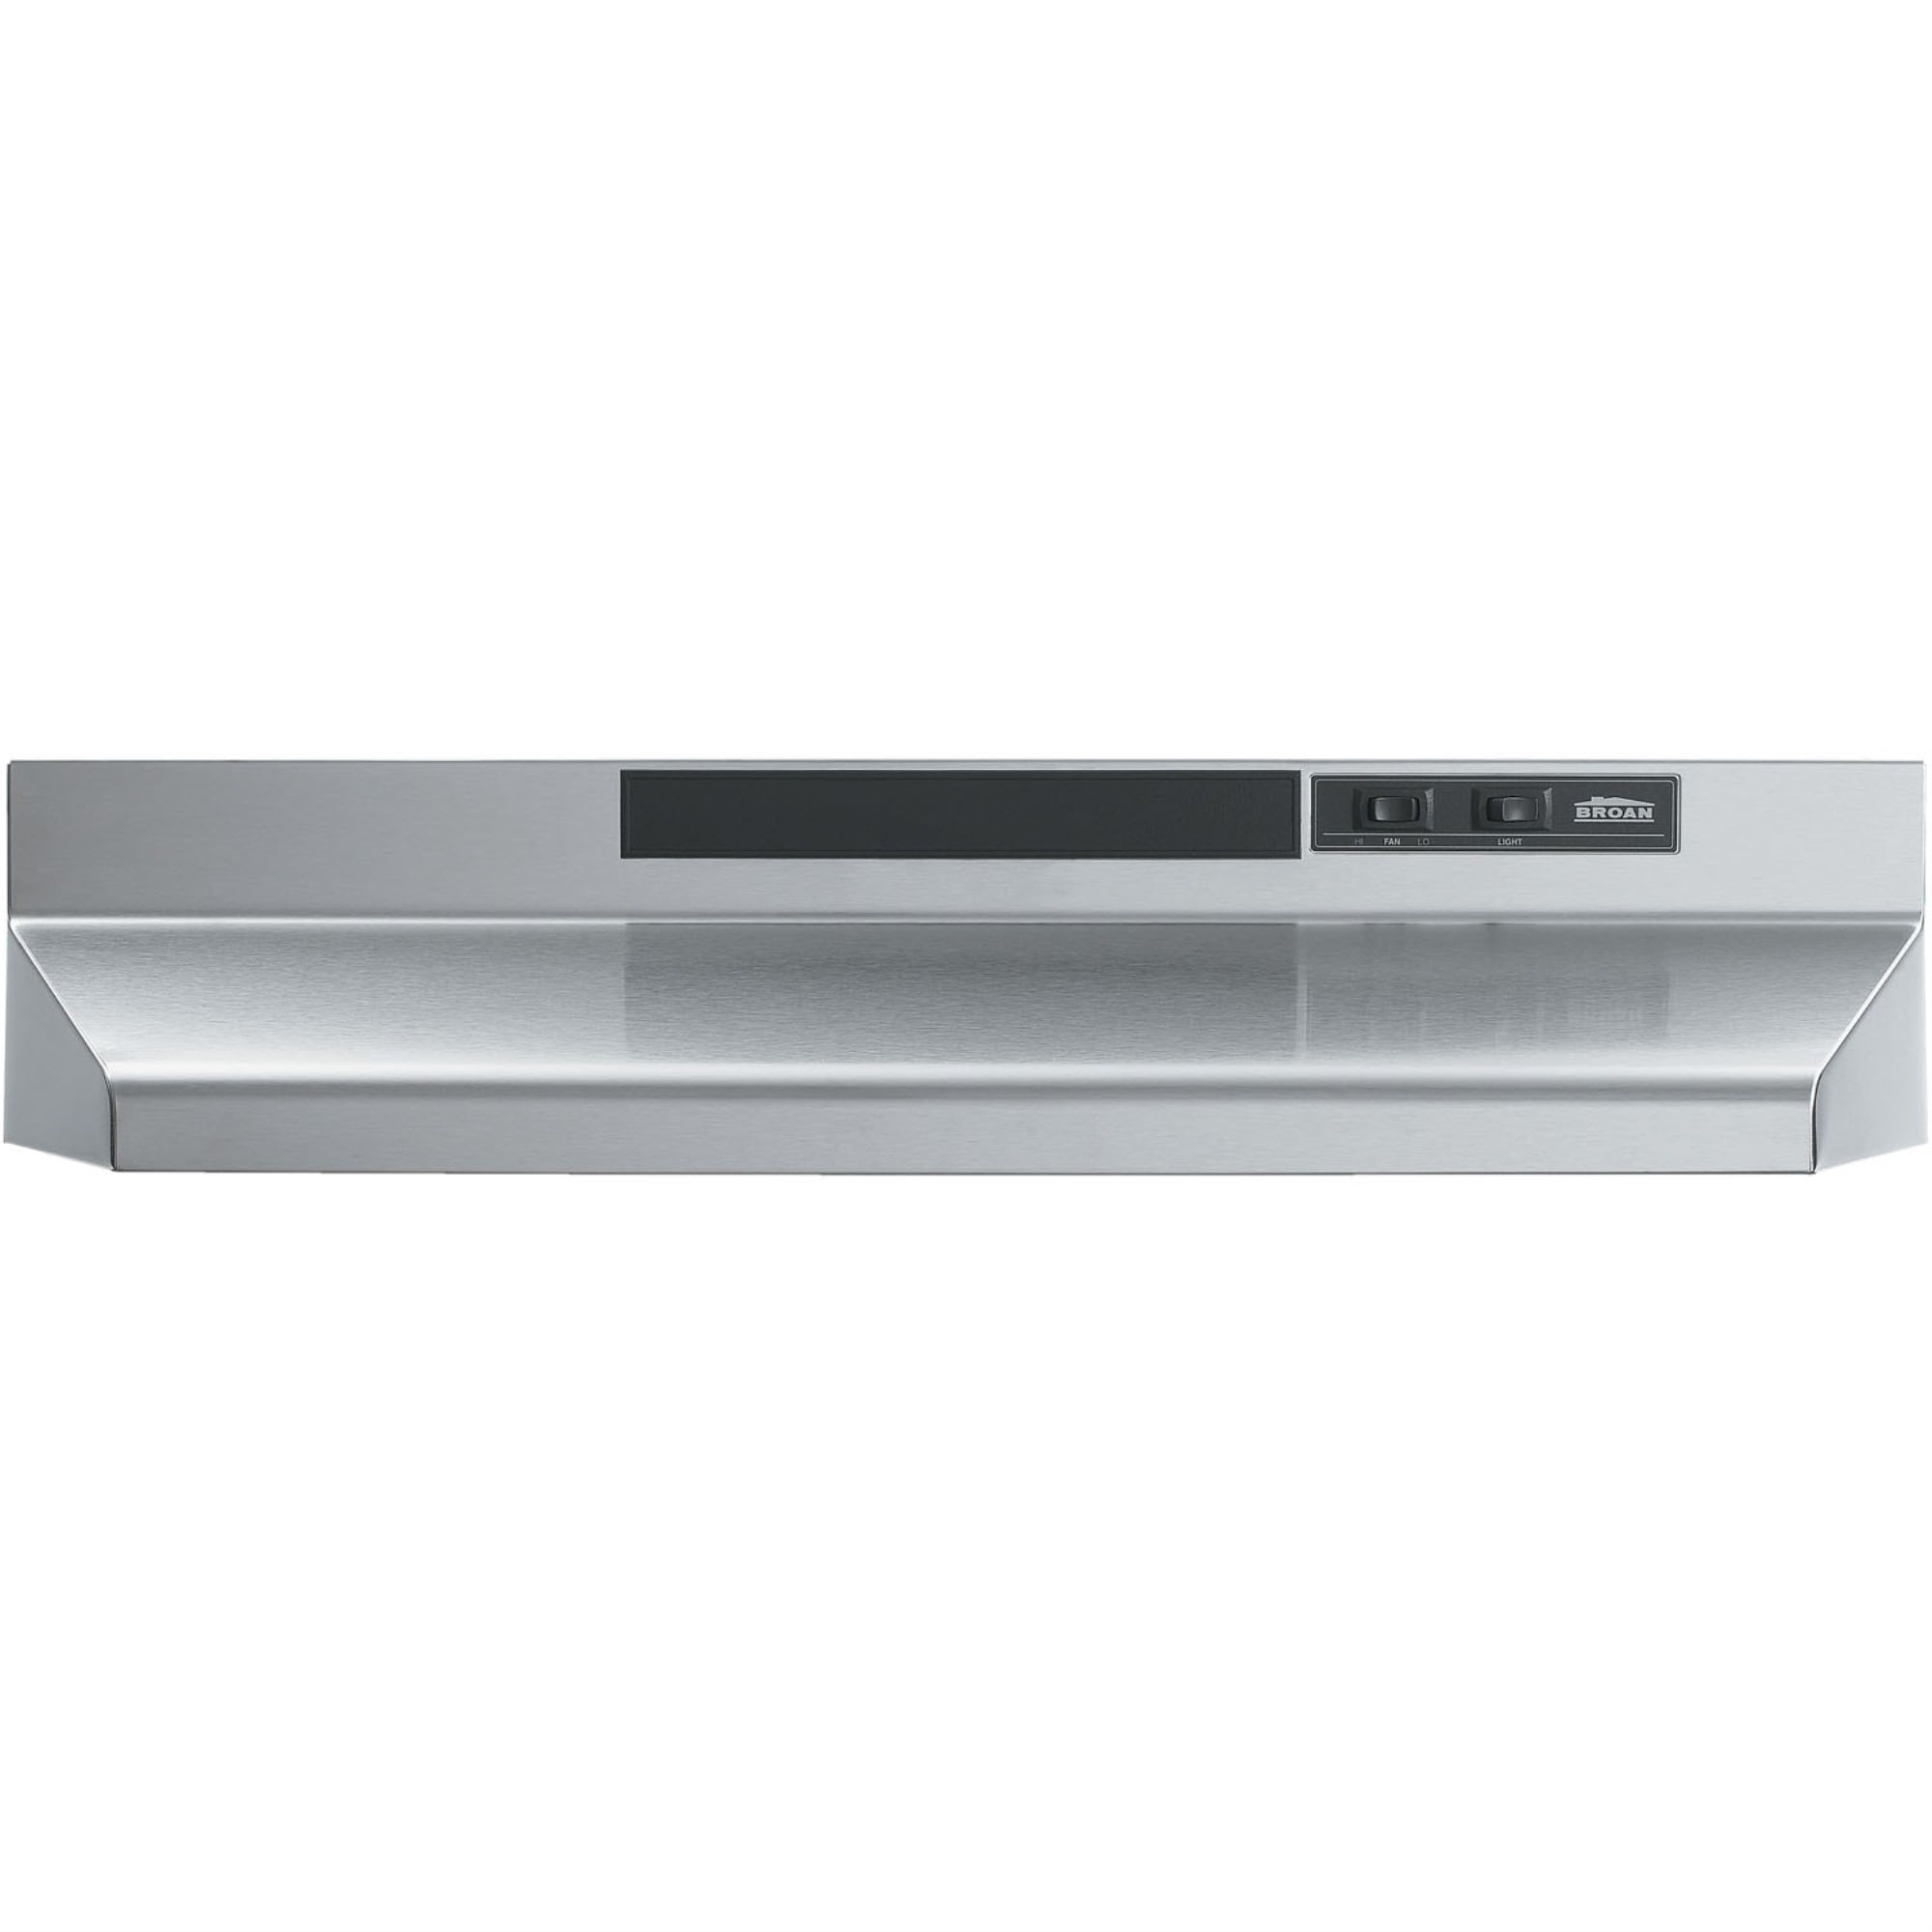 Stainless St Broan 403604 ADA Capable Under-Cabinet Range Hood 160 CFM 36-Inch 